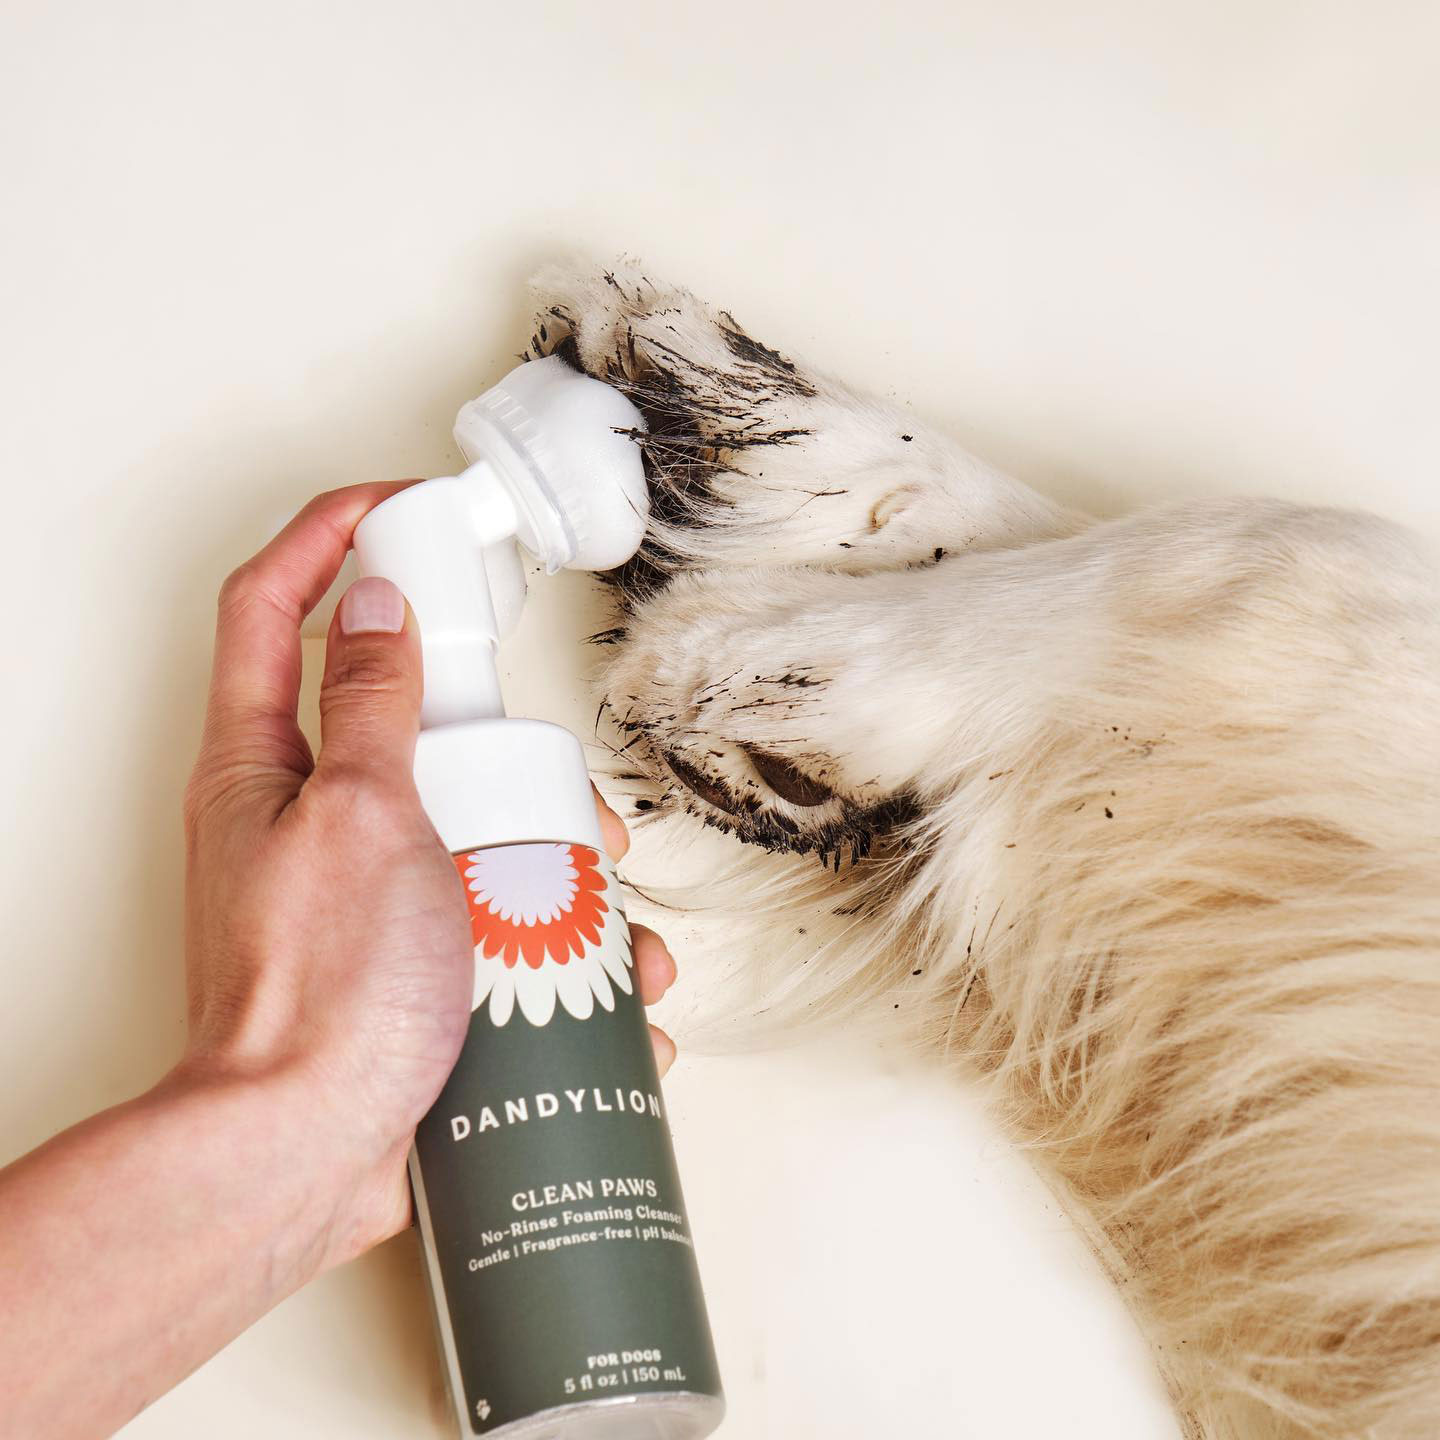 Dog&#x27;s paws being cleaned by Dandylion product